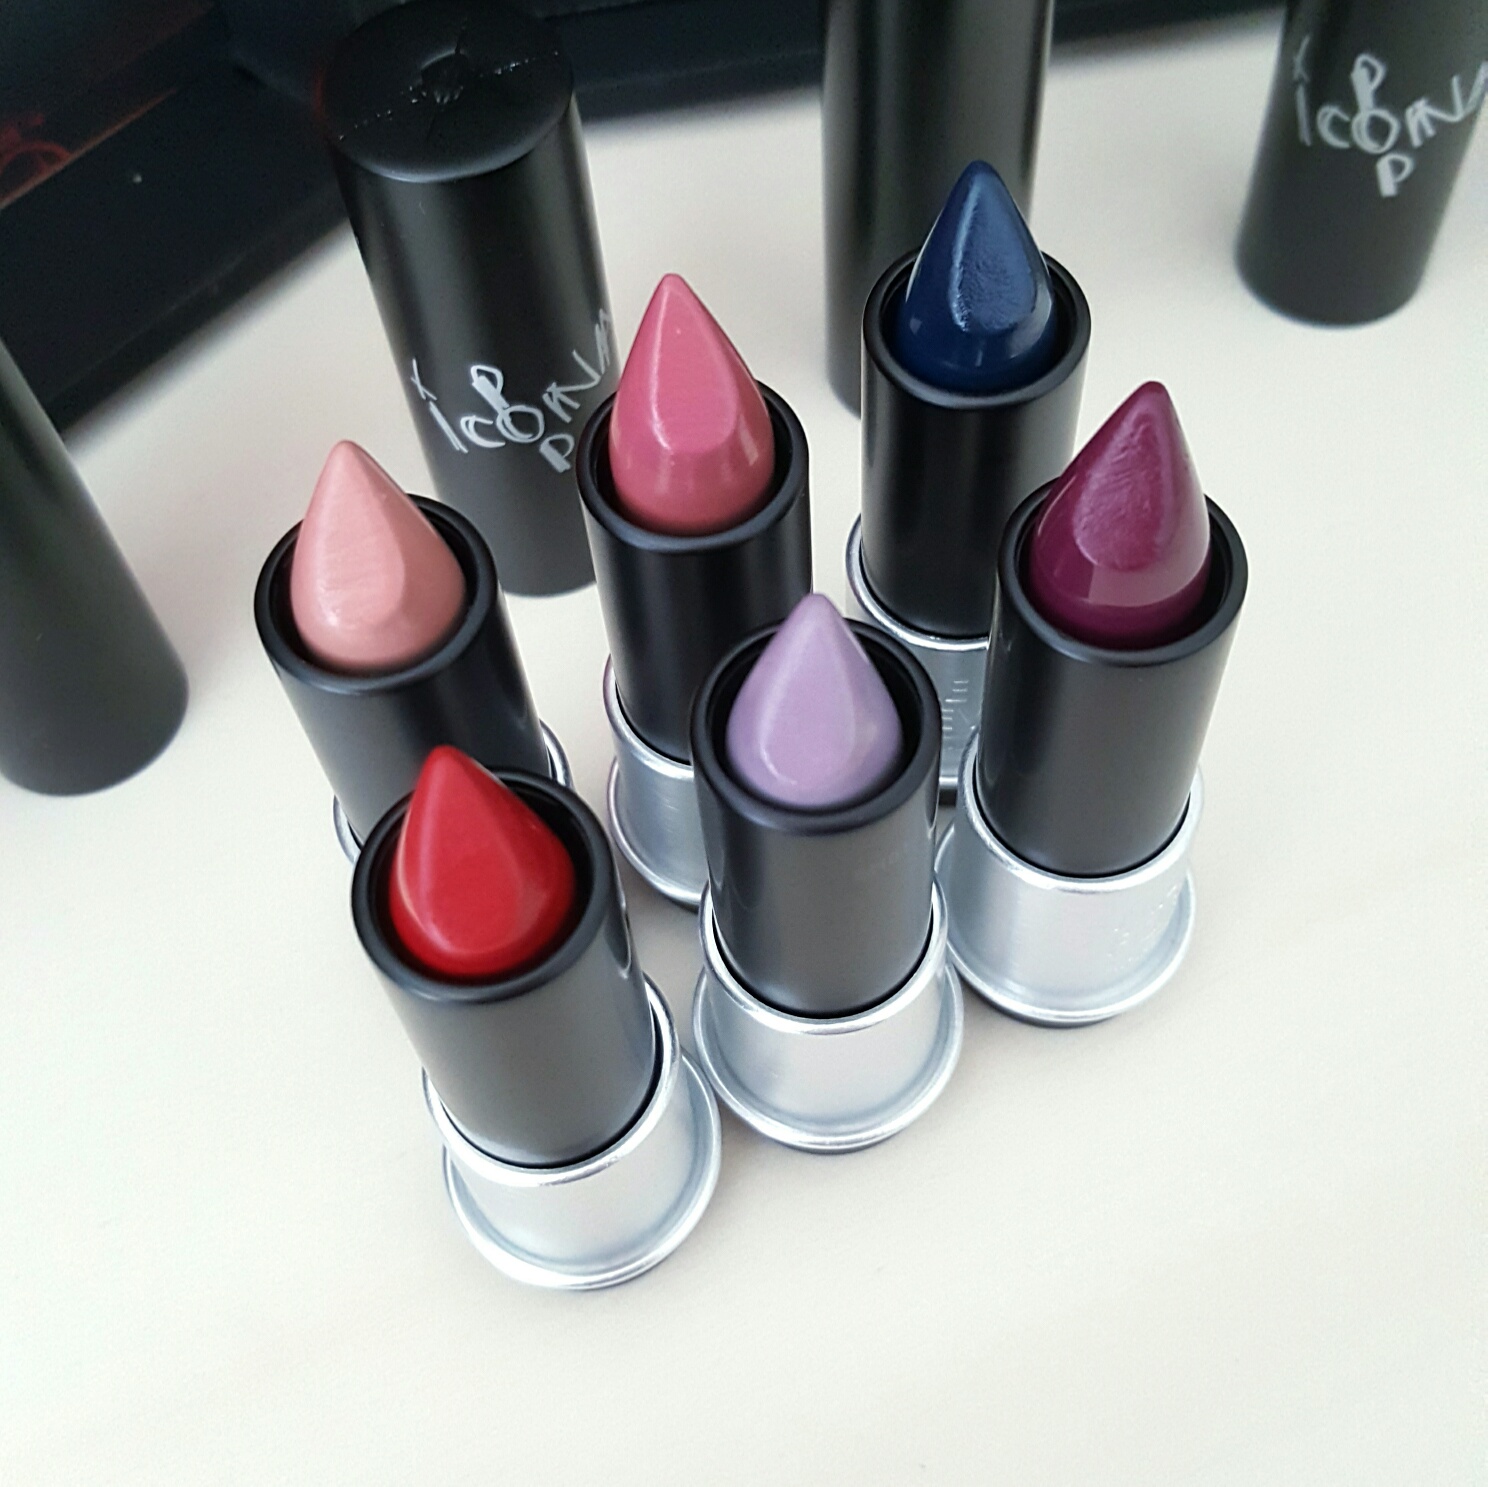 MAKE UP FOR EVER Artist Rouge Lipstick Review & Swatches*, C502, C506 and C603, C105, M401, C211, Make Up For Ever, beauty blogger, beauty blog, canadian beauty blogger, canadian blog, sephora, sephora canada, toronto, toronto blogger